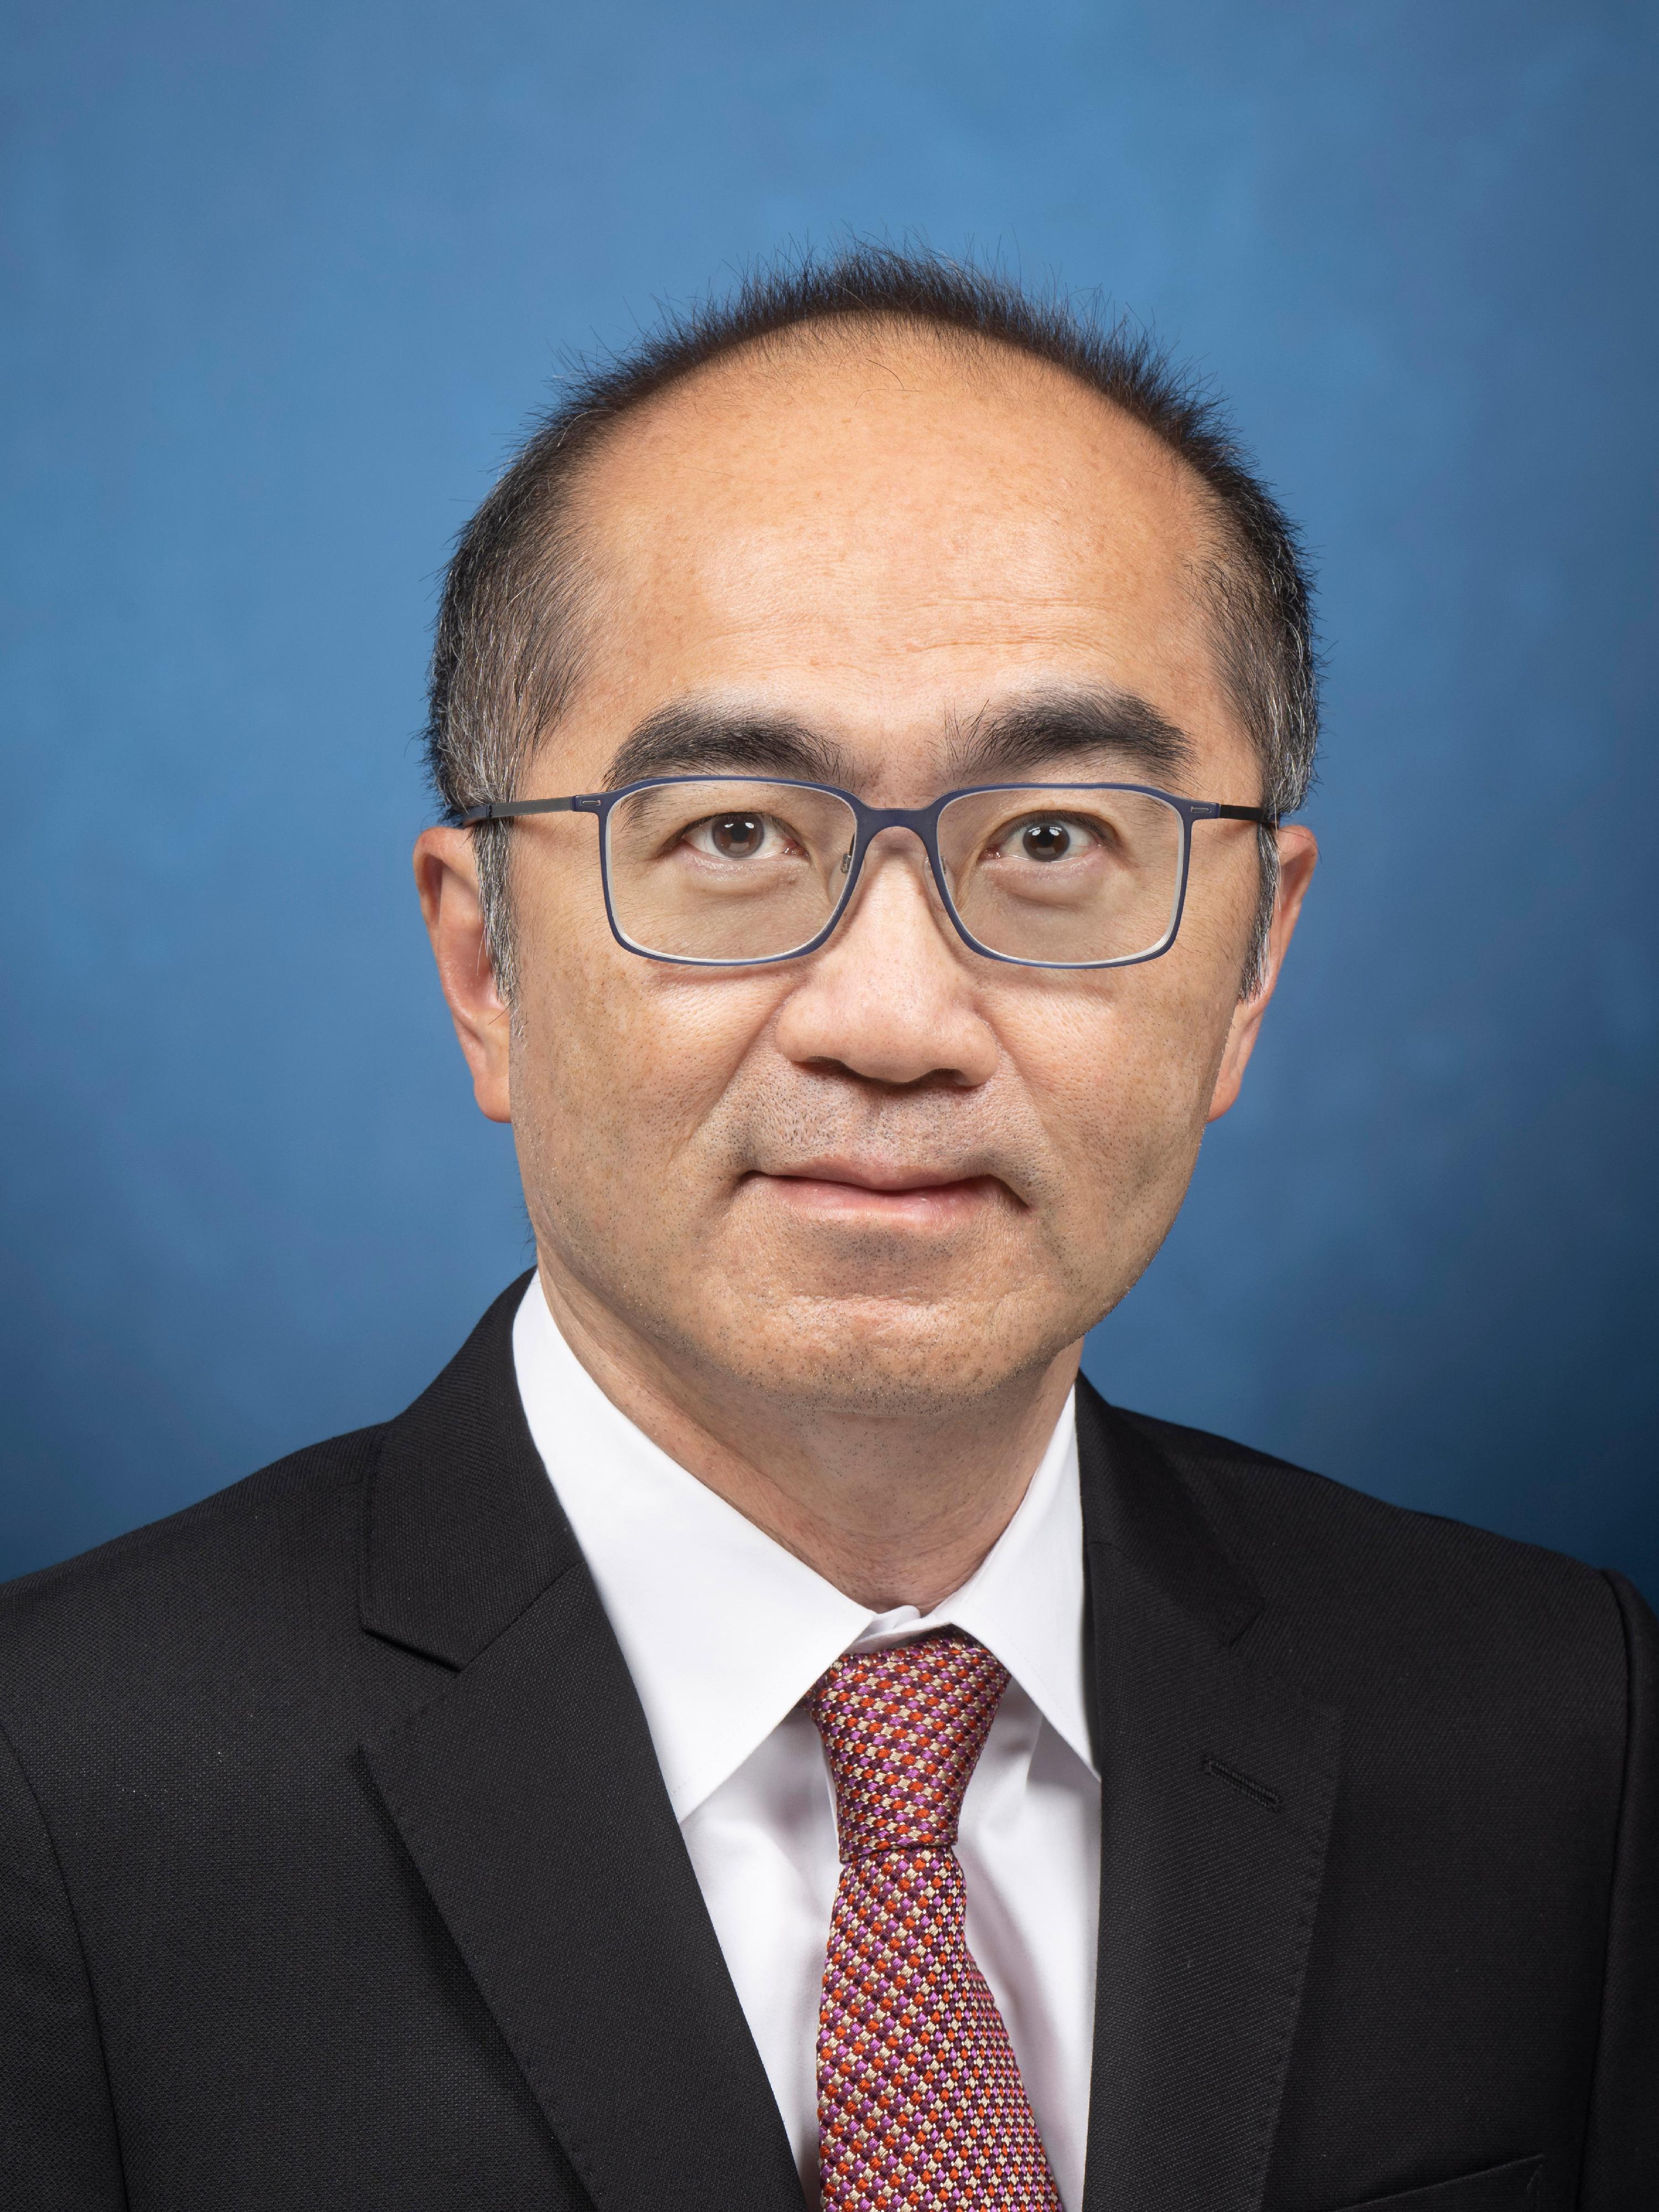 Mr Adolph Leung Wing-sing, Deputy Government Economist, will take up the post of Government Economist on April 19, 2022.